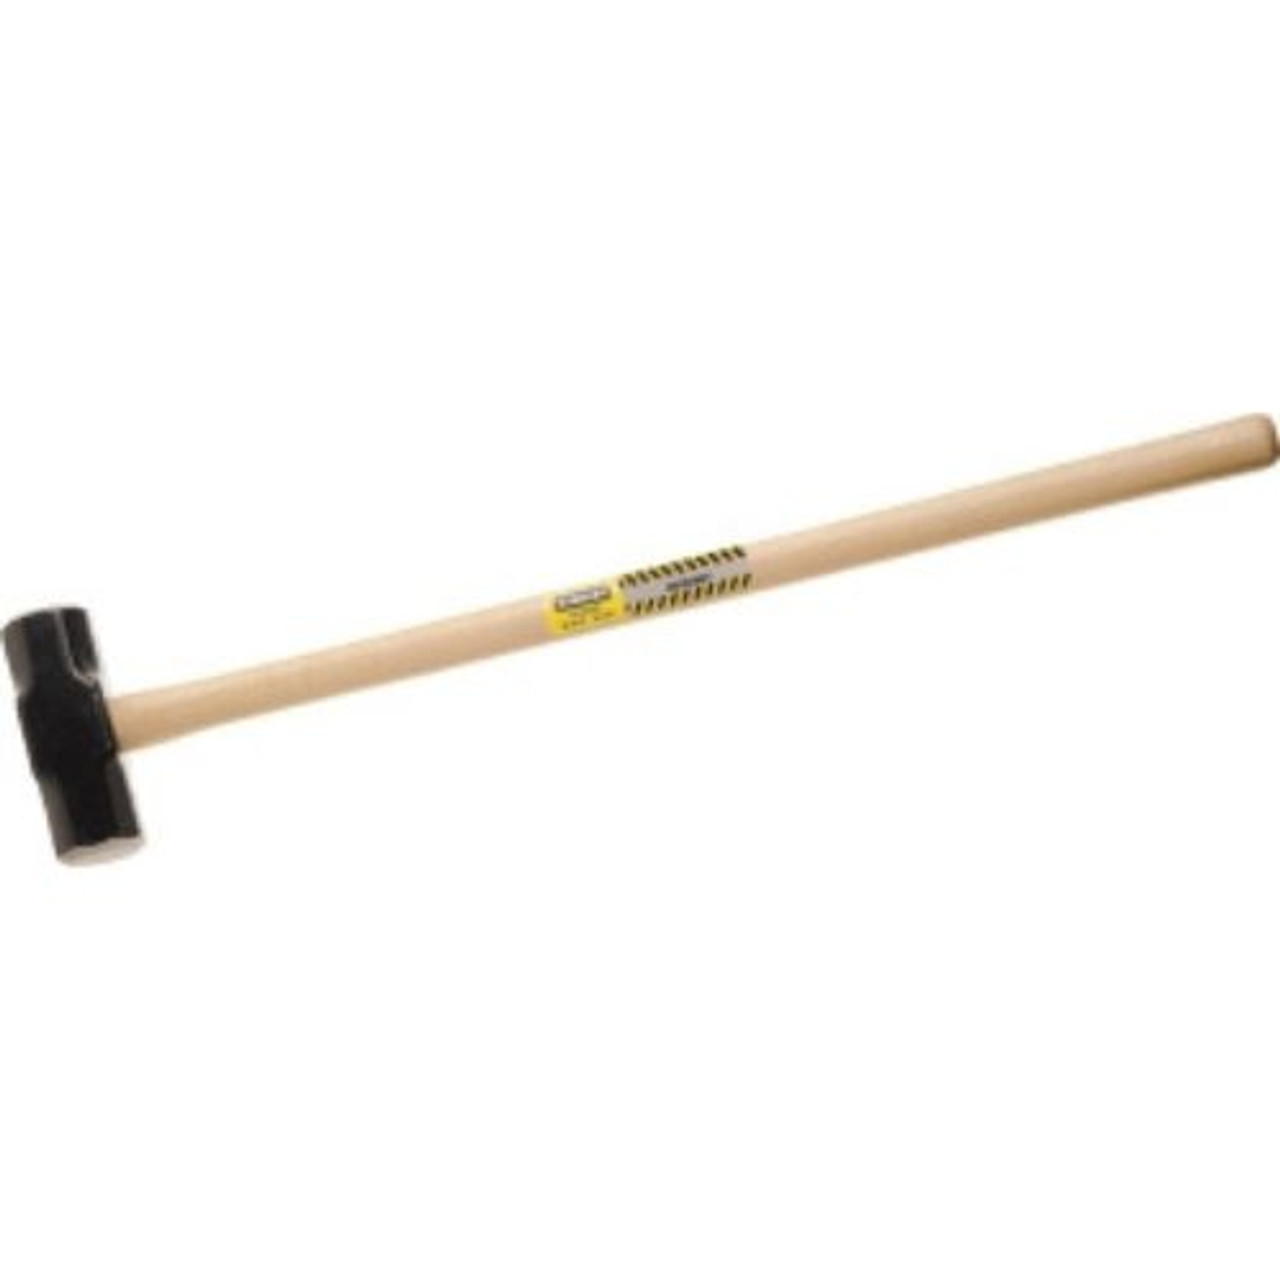 Stanley Products Hickory Handle Sledge Hammer, 16 lb #56-816 (2